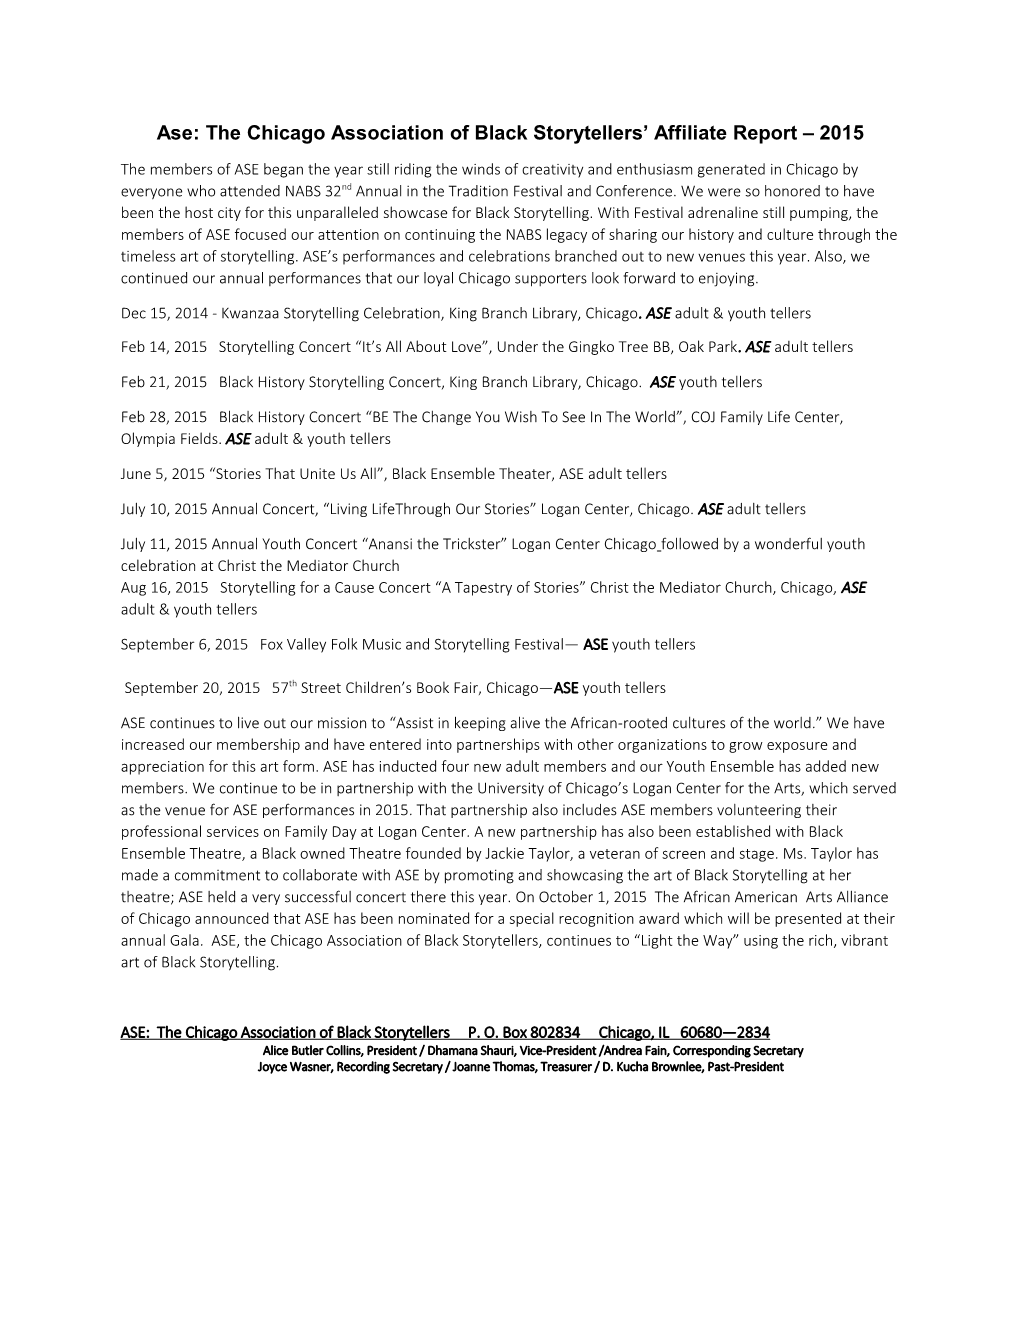 Ase: the Chicago Association of Black Storytellers Affiliate Report 2015